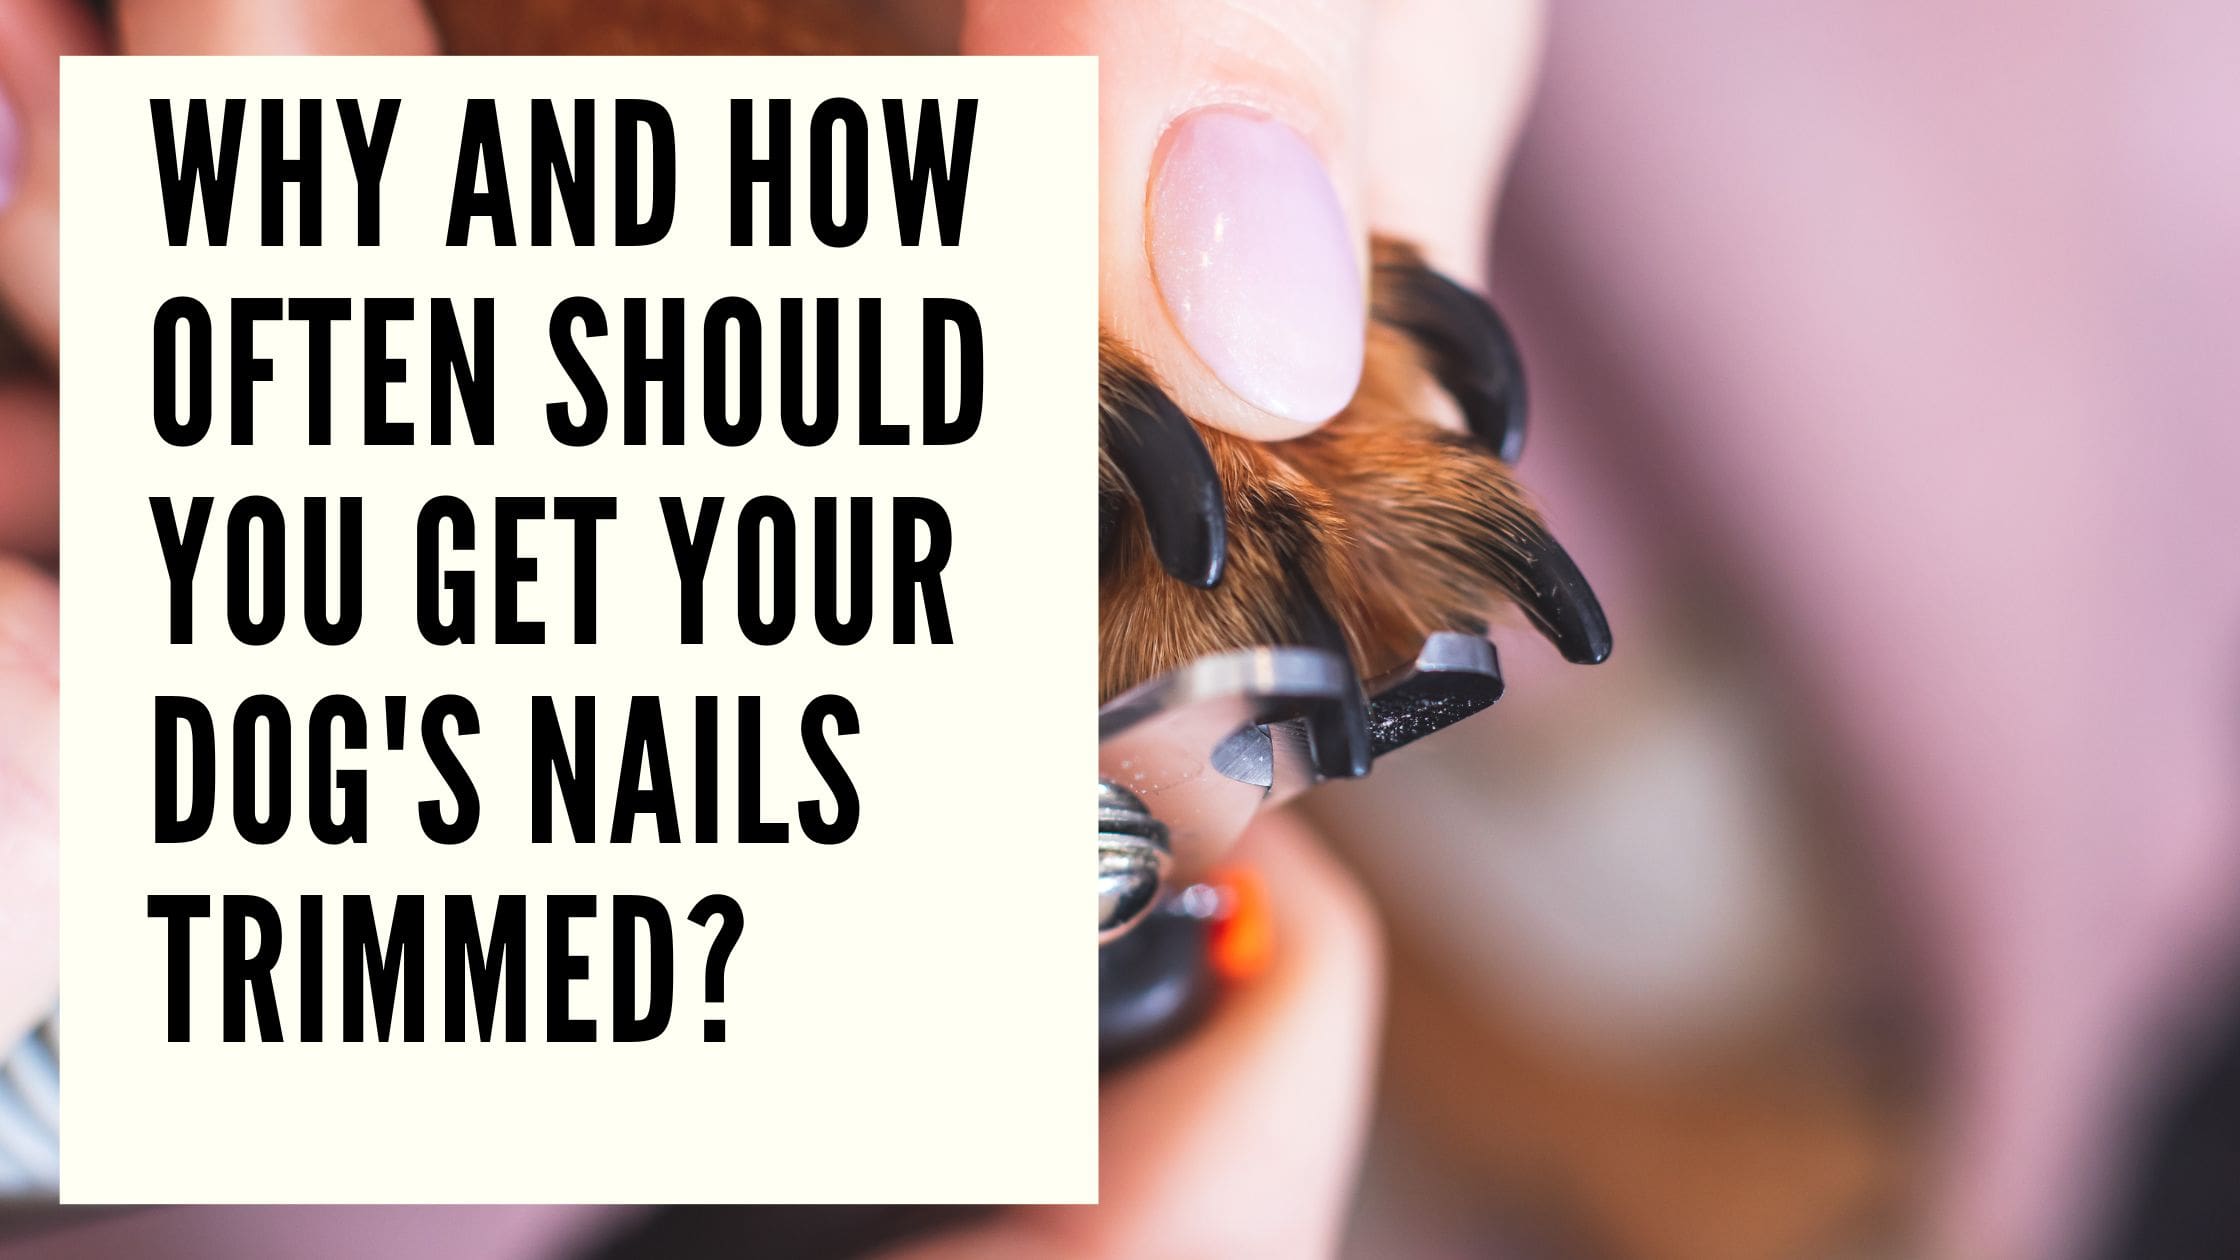 How to Cut Your Dog's Nails at Home? - DogRook Blog - DogRook